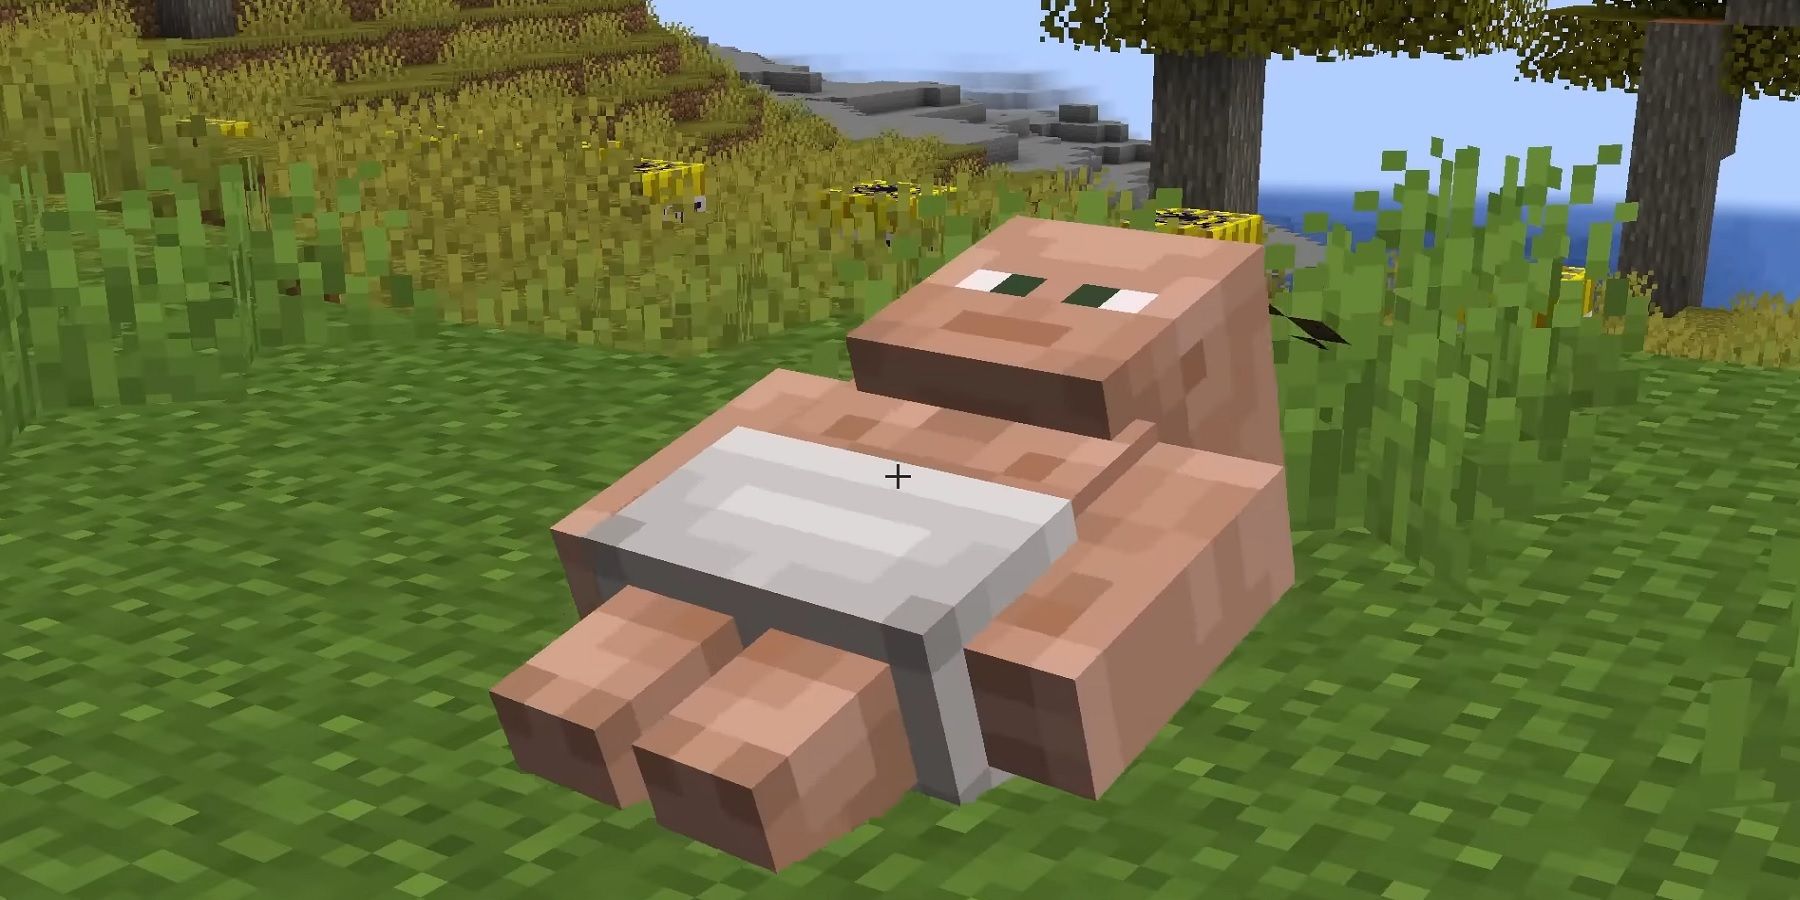 Minecraft Modder Adds a Cursed Puking Baby to the
Game